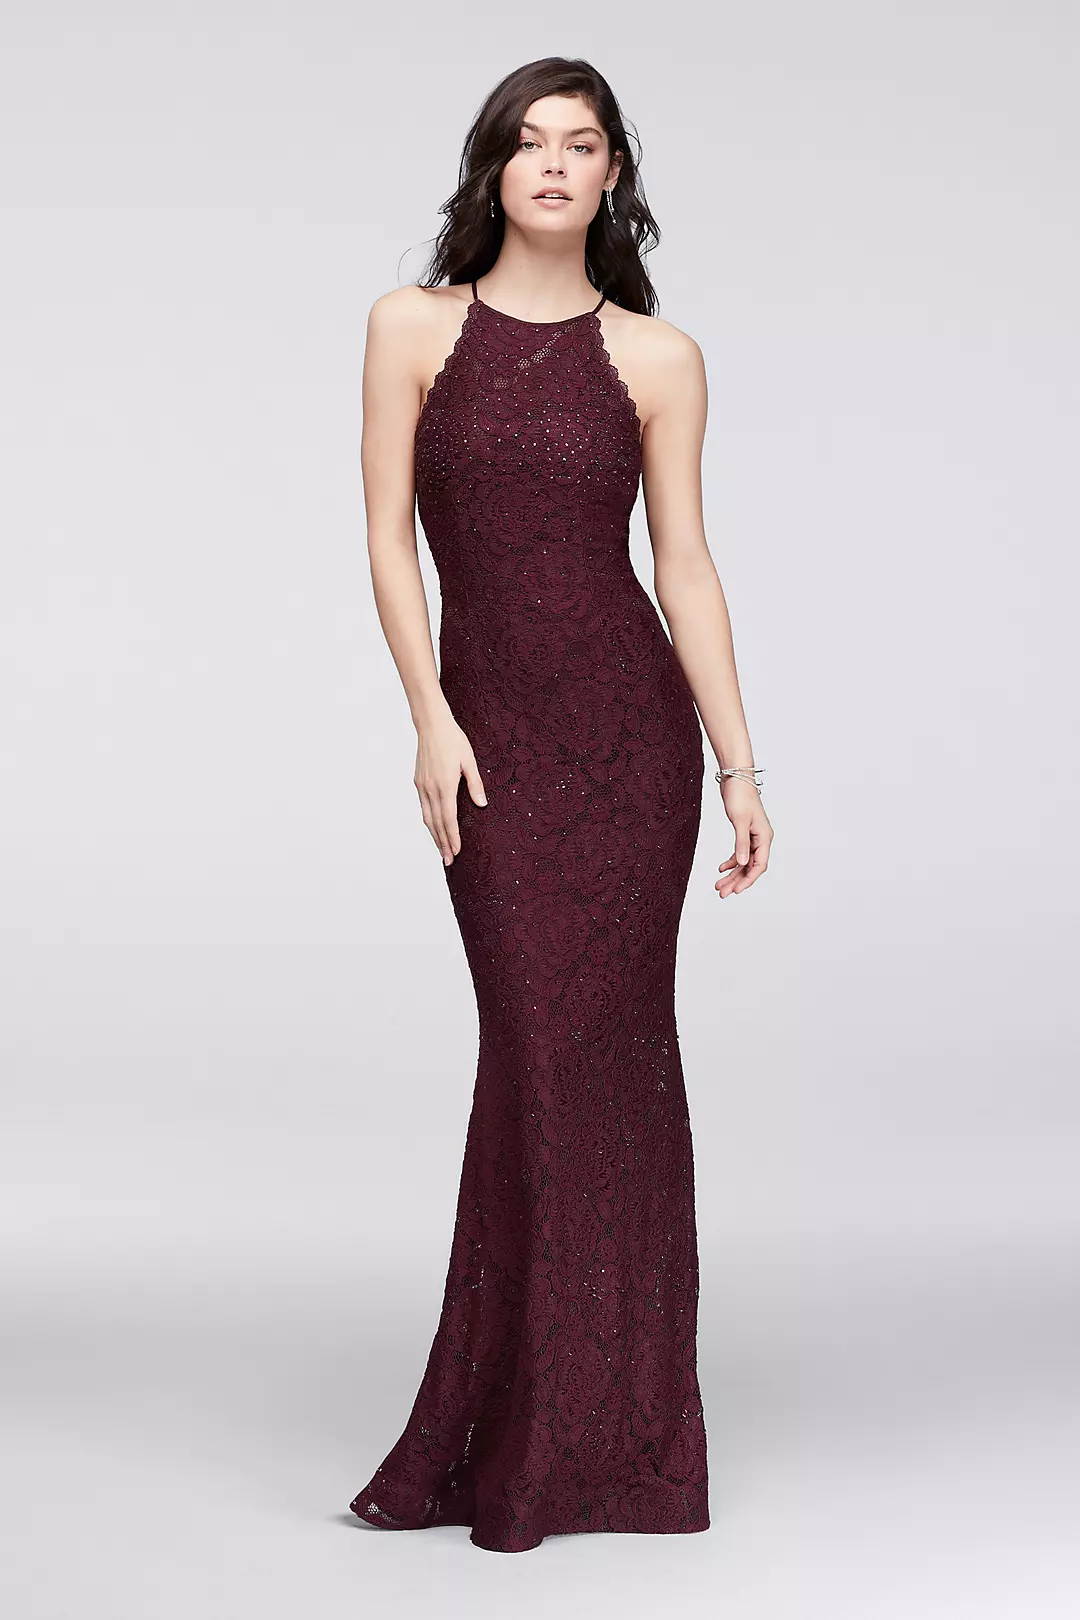 Allover Lace Halter Dress with Crystal Beading Image